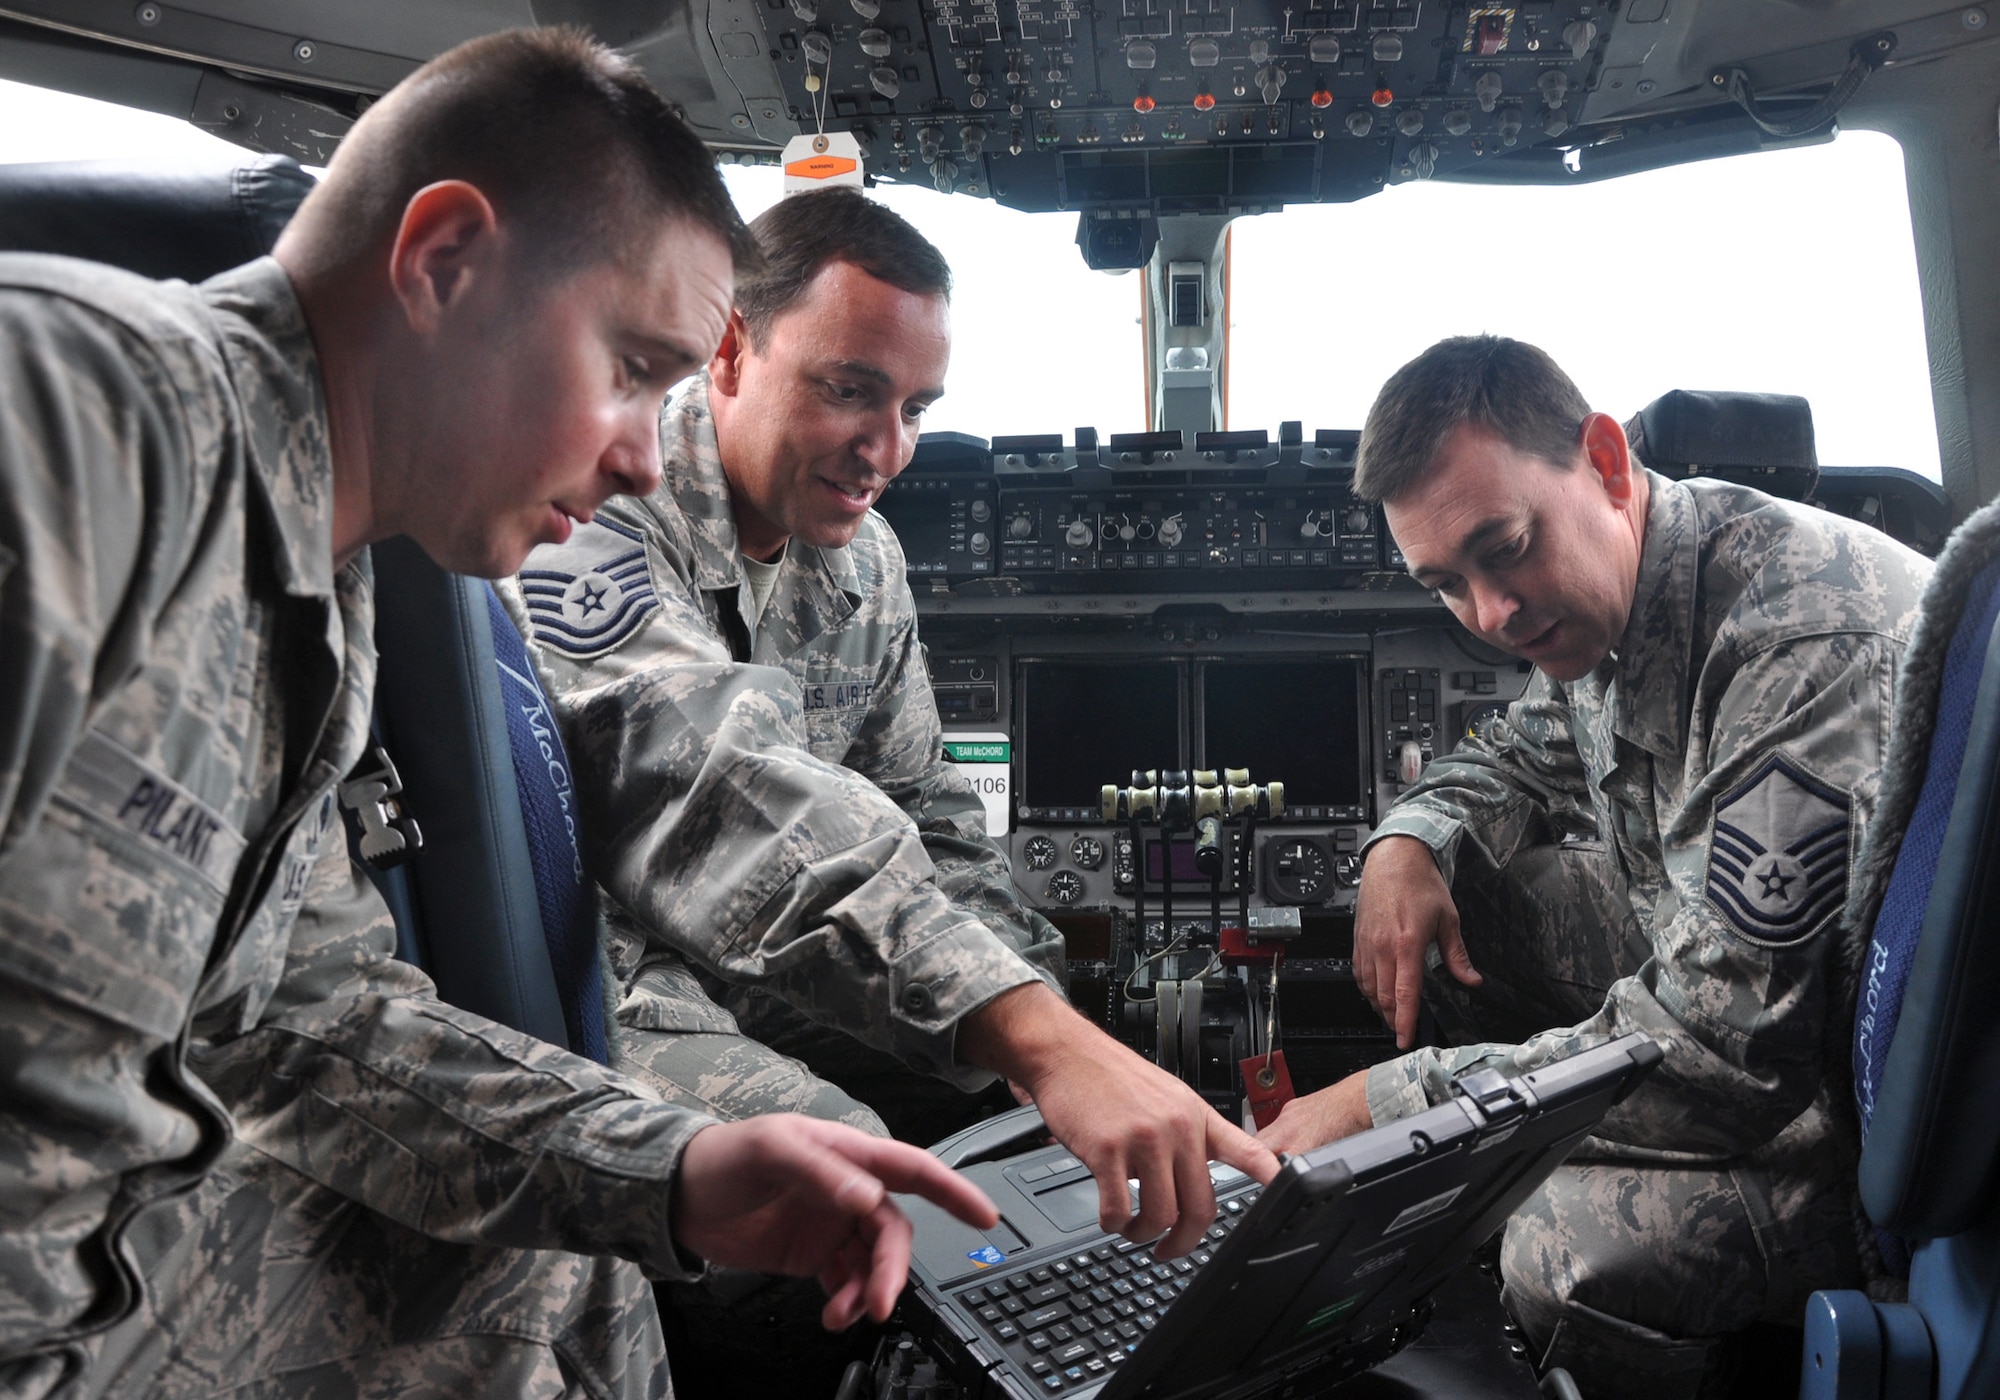 MCCHORD FIELD, Wash. – (Left to right) Senior Airman Jerrod Pilant, 446th Aircraft Maintenance Squadron crew chief here, with crew chiefs Master Sgt. Jesse Spainhour and Master Sgt. Todd Jones, 164th Aircraft Maintenance Squadron, Tennessee Air National Guard, check radio frequencies on the flight deck of a C-17 Globemaster III, Aug. 30.  Jones is leading a group of crew chiefs from the Tennessee Air Guard who are training with Reservists from the 446th AMXS gaining proficiency and certification for C-17 aircraft systems.  (U.S. Air Force photo by Tech. Sgt. Elizabeth Moody)